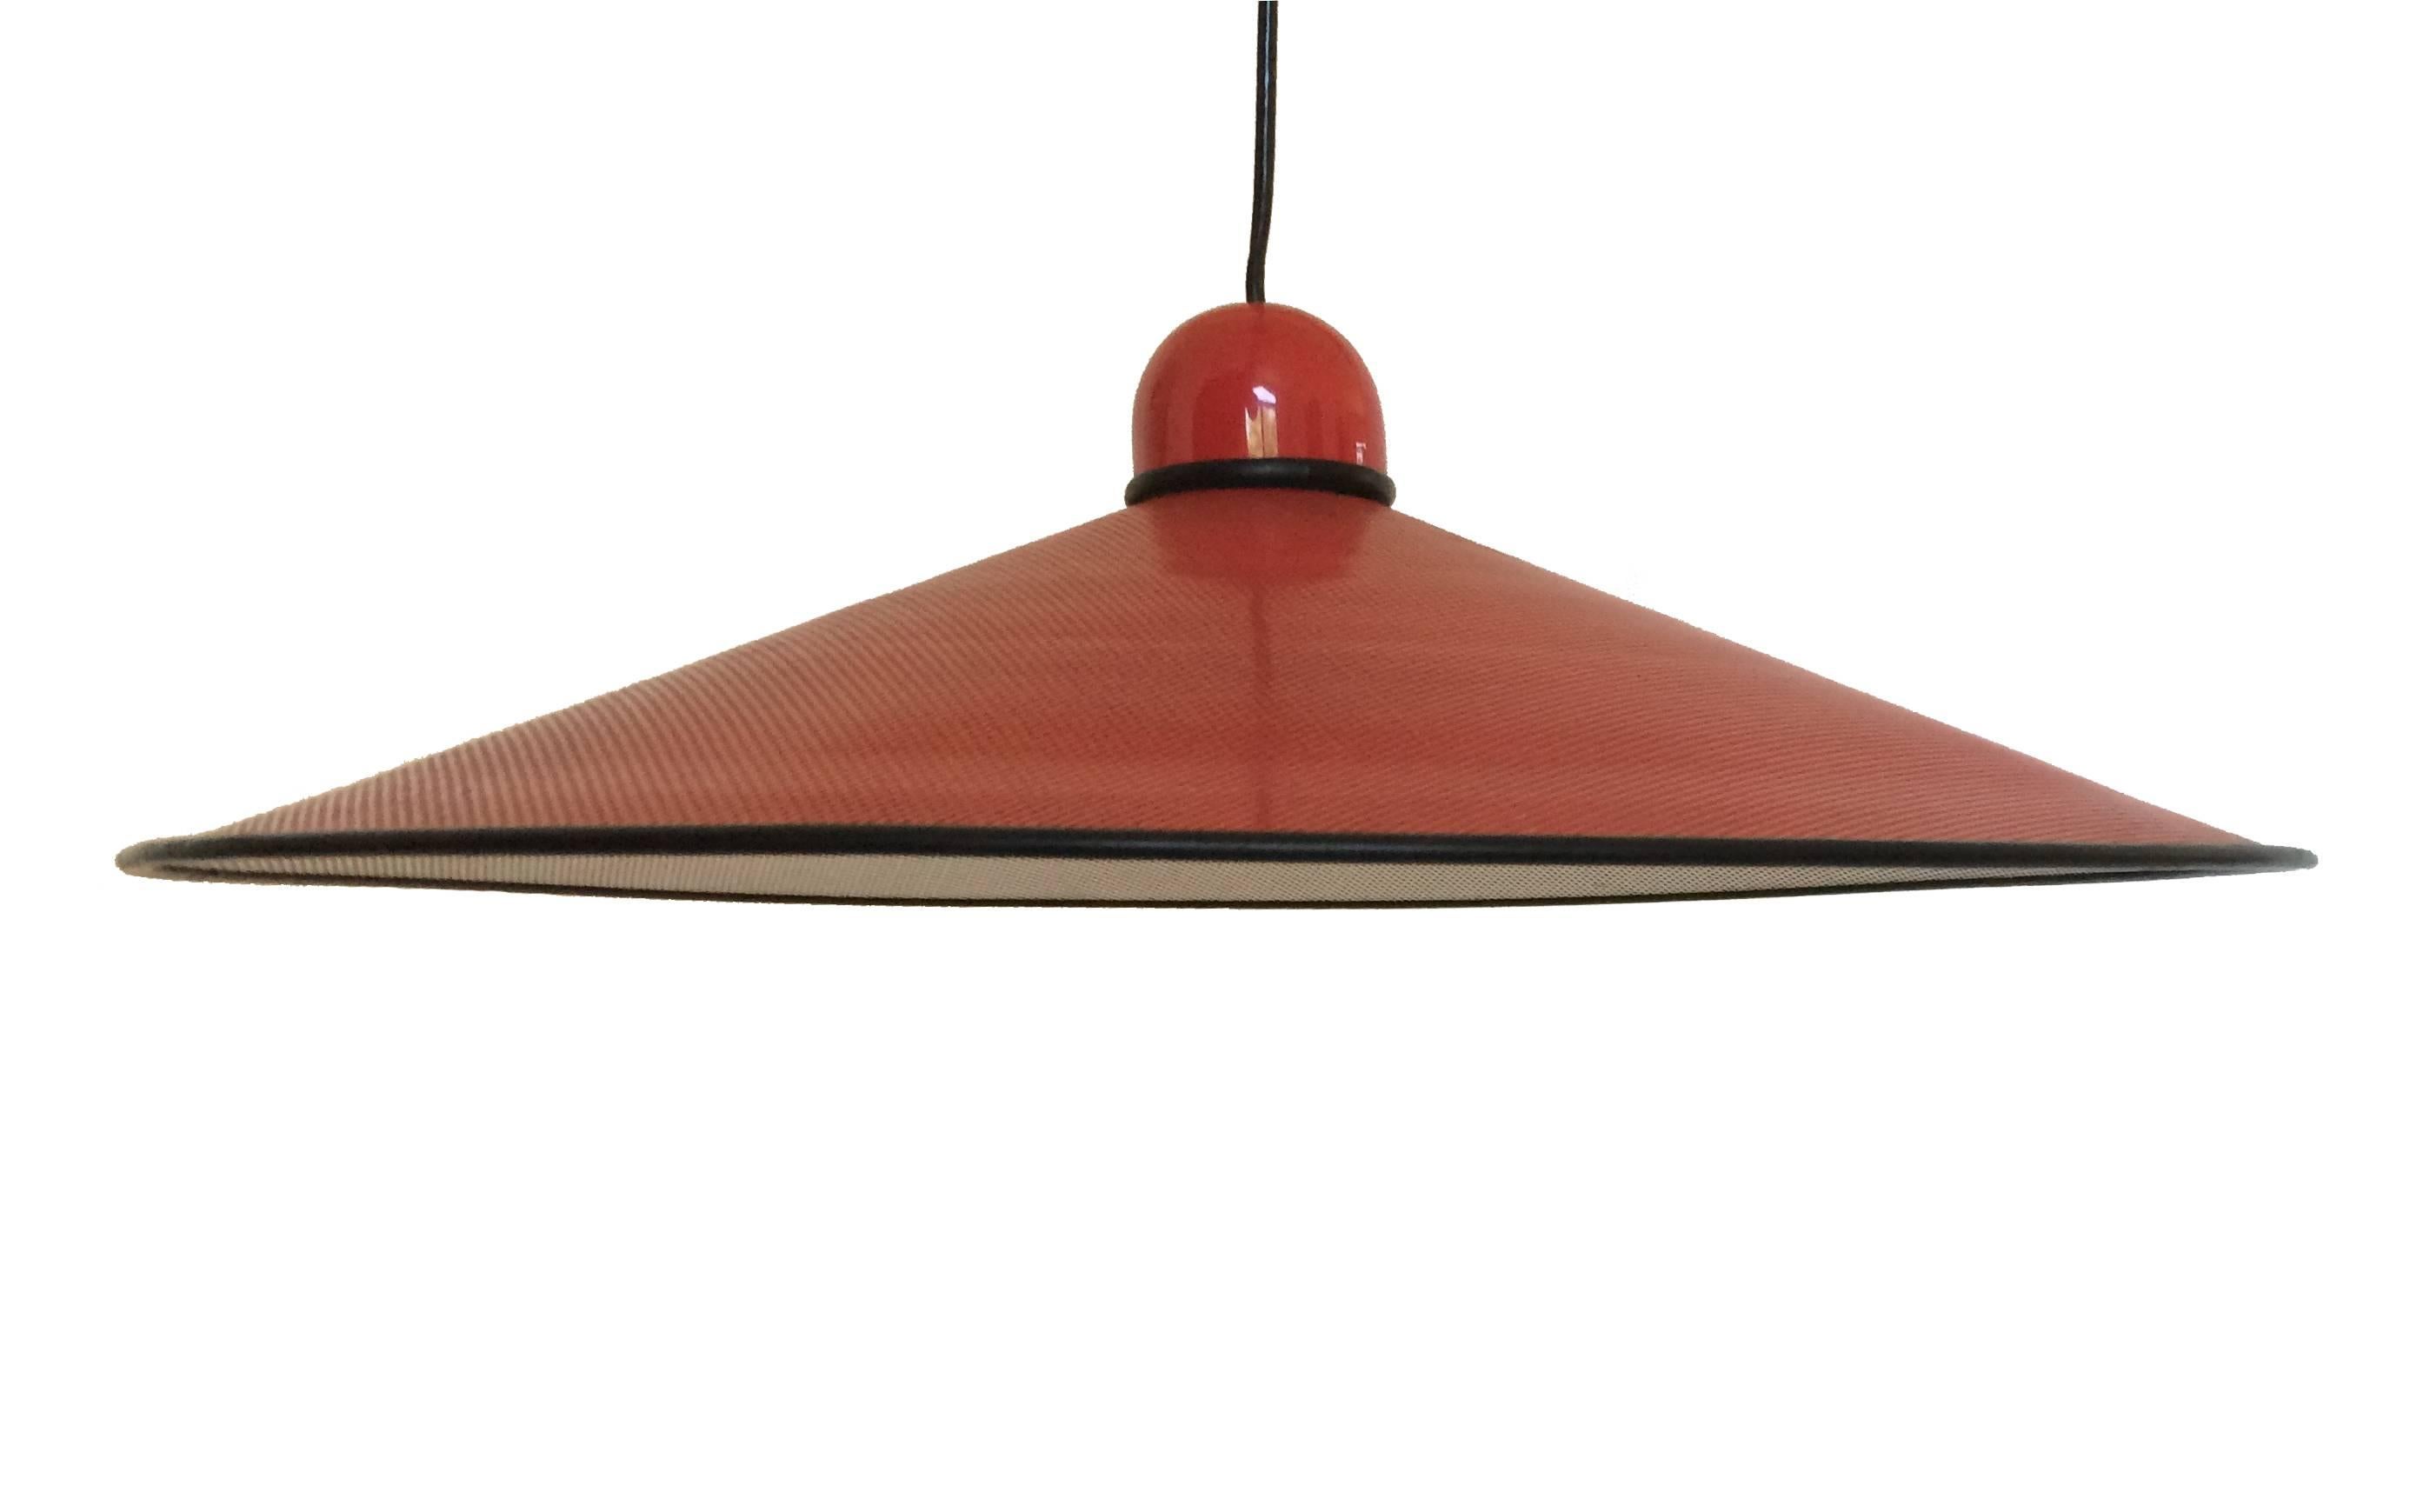 Fantastic Ron Rezek design featuring a light diffusing shade. This particular model is equipped with a plug.